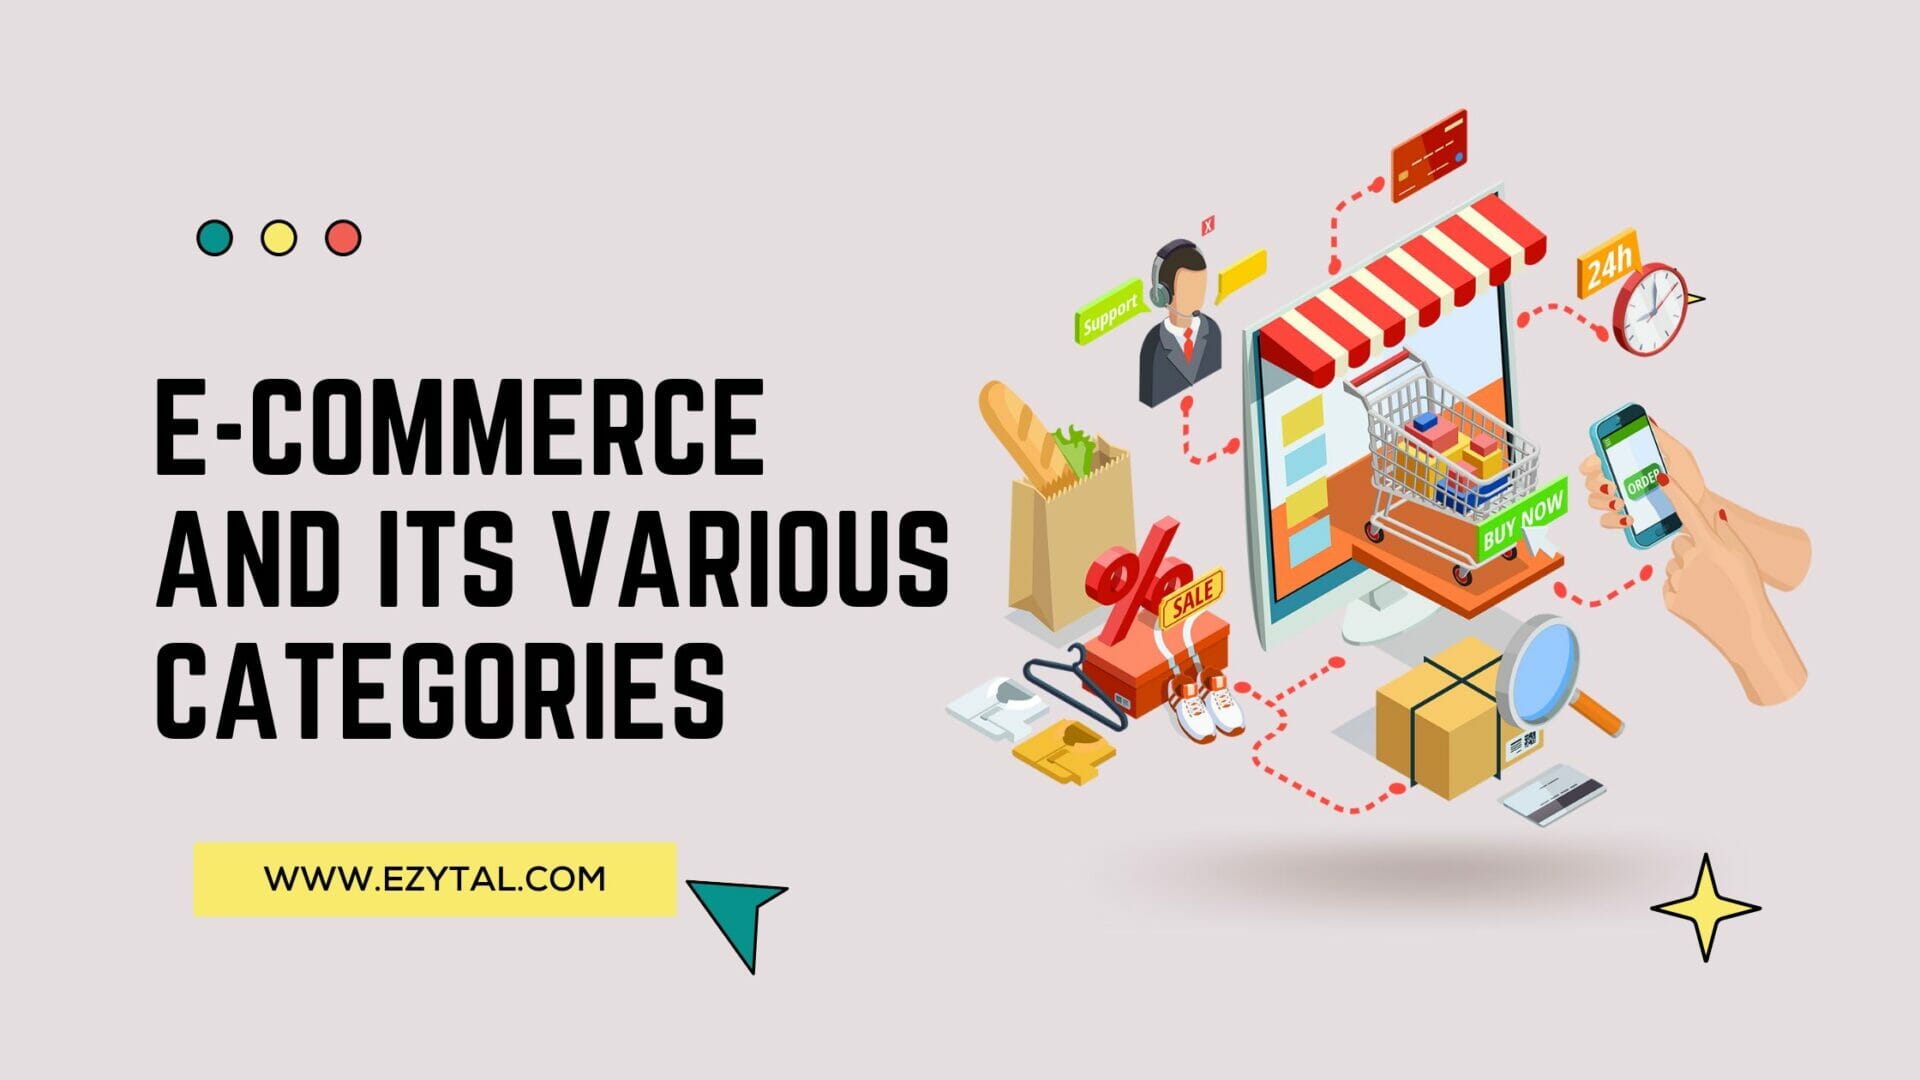 E-commerce and its various categories